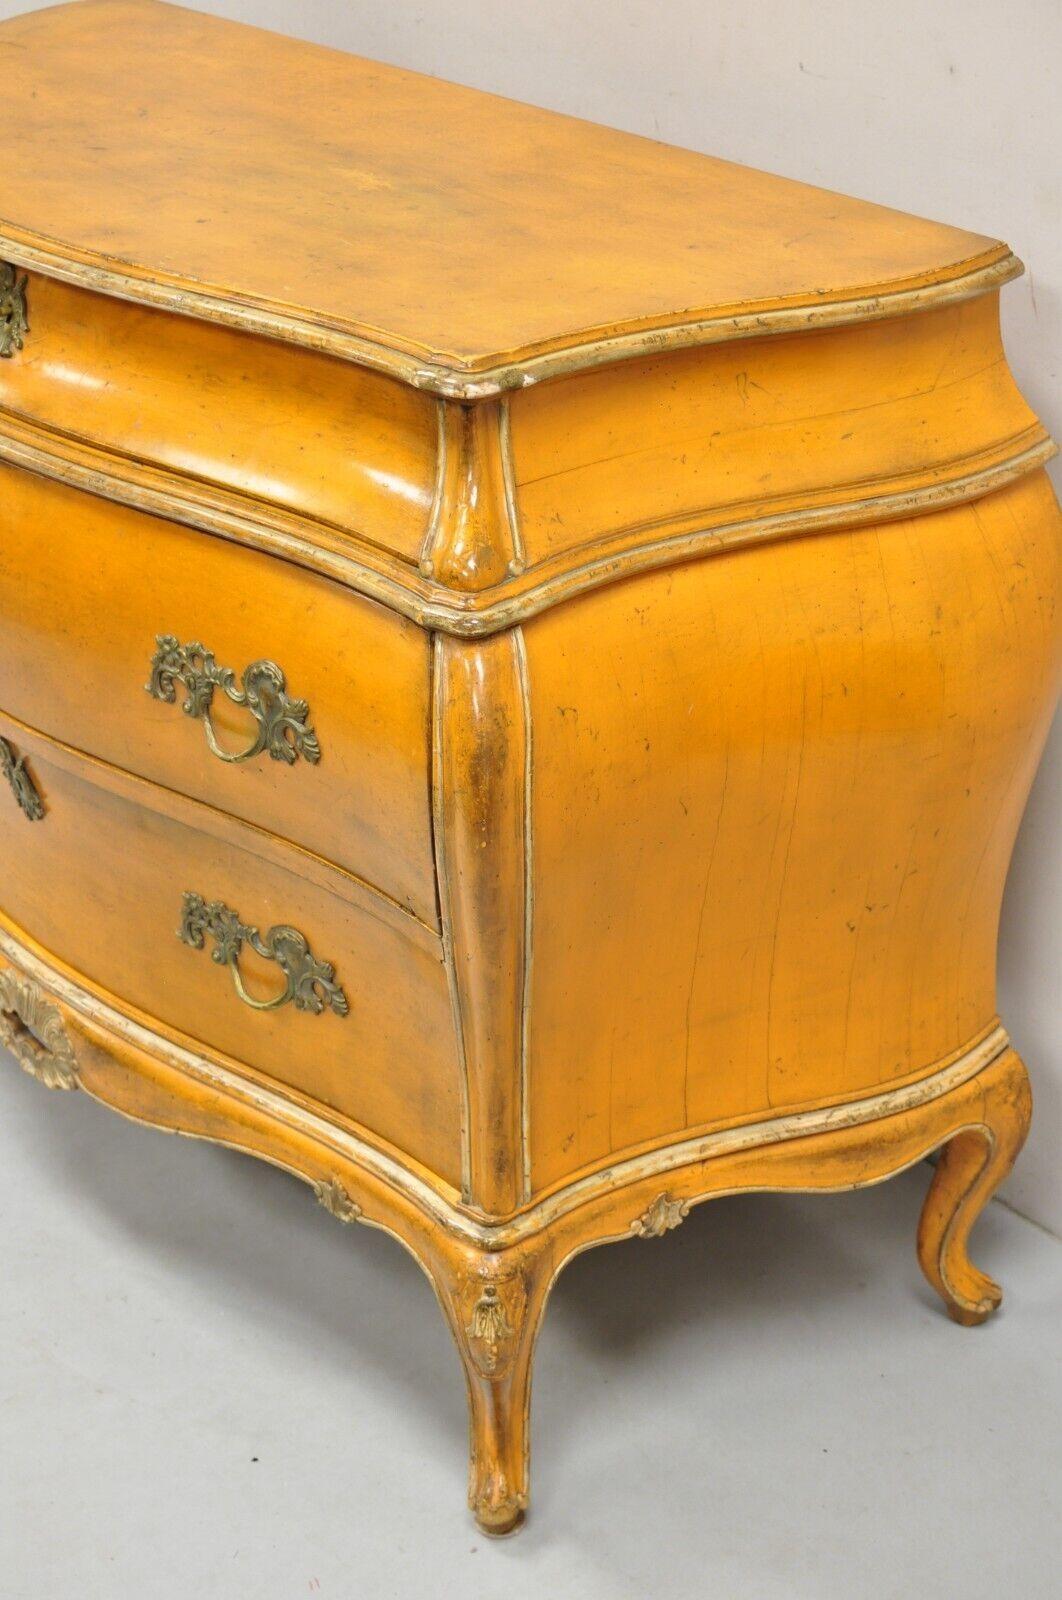 Antique Italian Rococo Orange Painted Bombe Commode Chest of Drawers For Sale 5